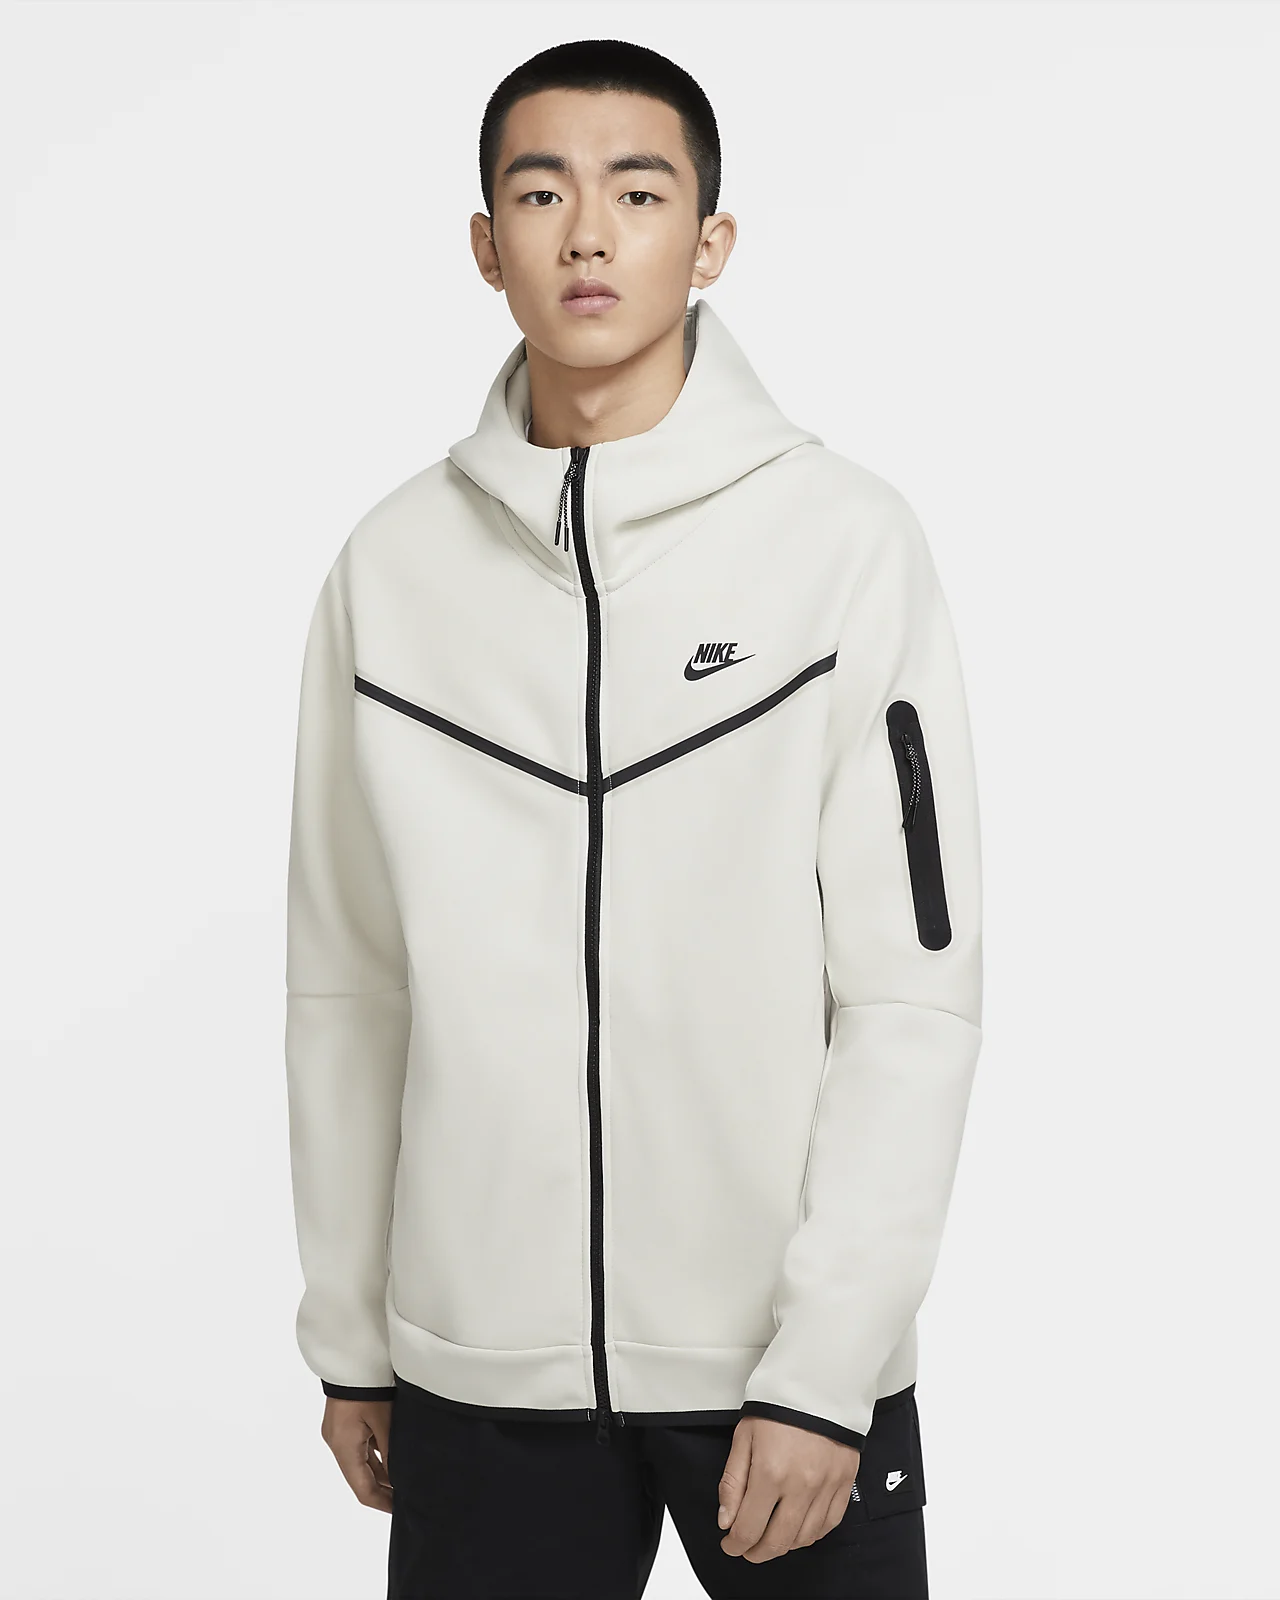 Nike Tech Fleece: The ultimate in comfort and style